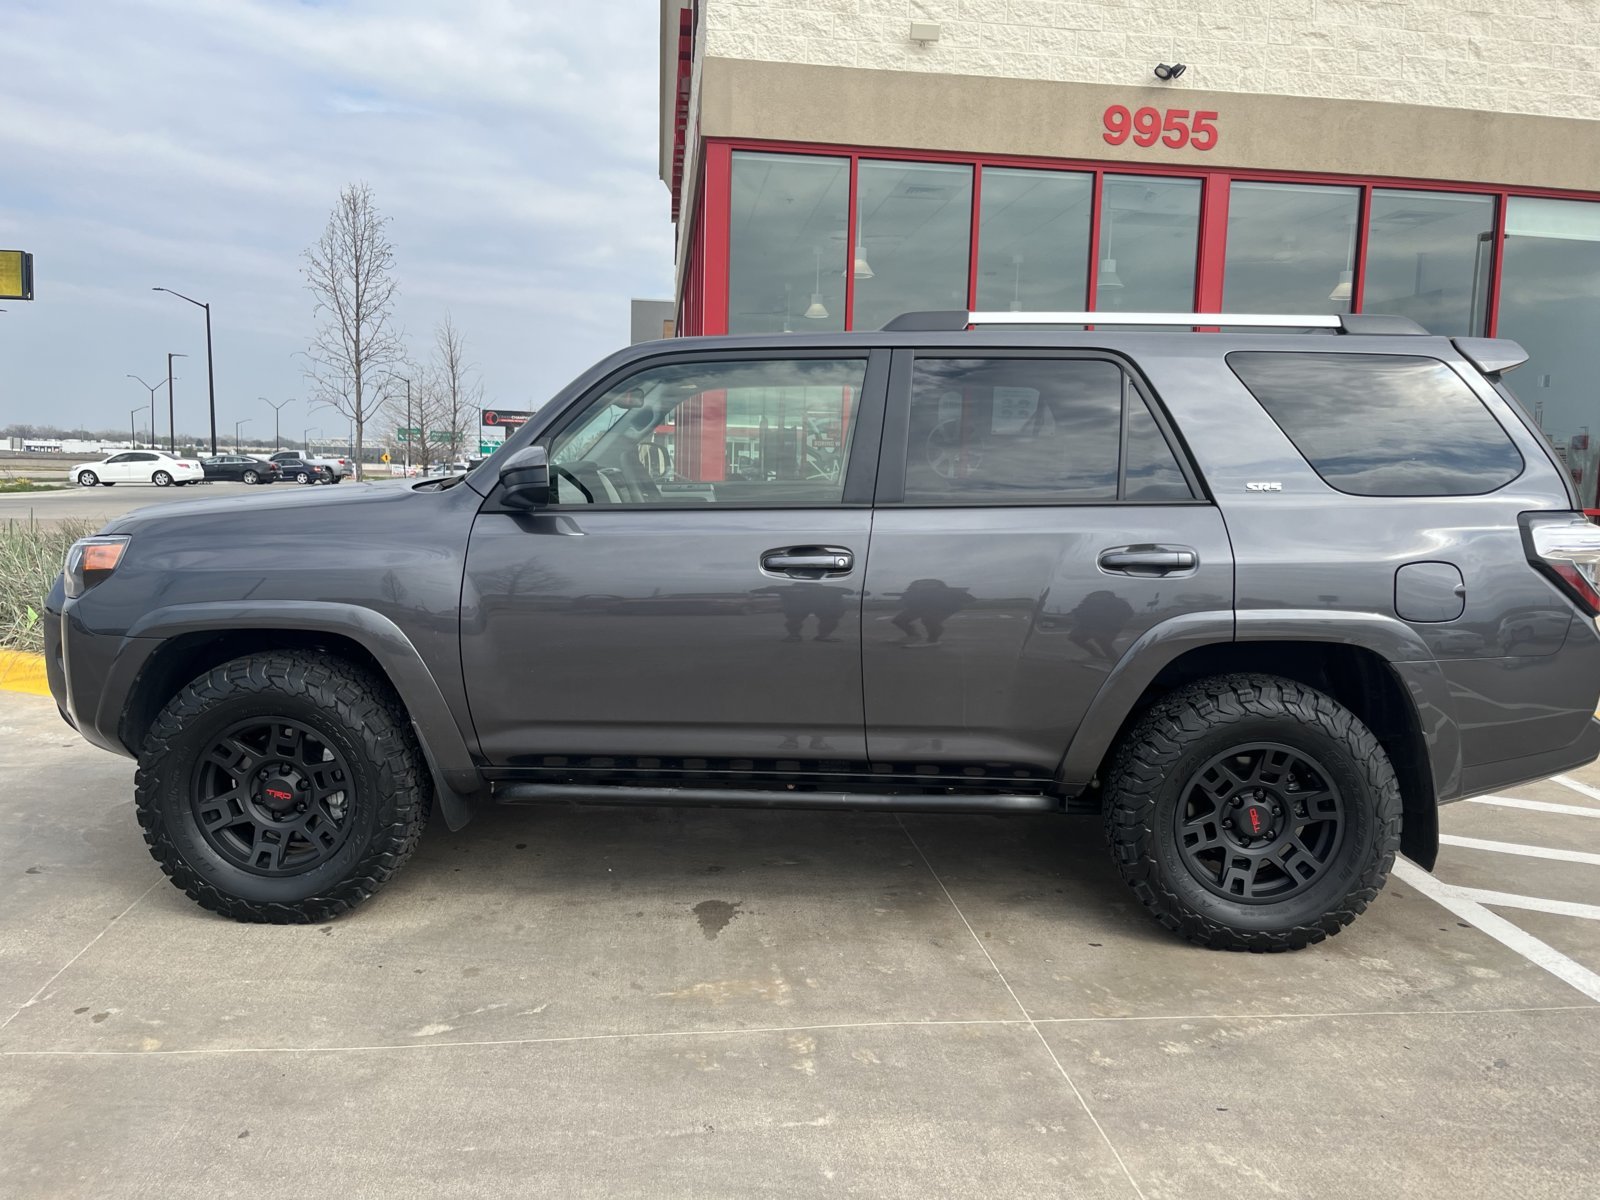 What have you done to your 5th Gen 4Runner today?, Page 1026